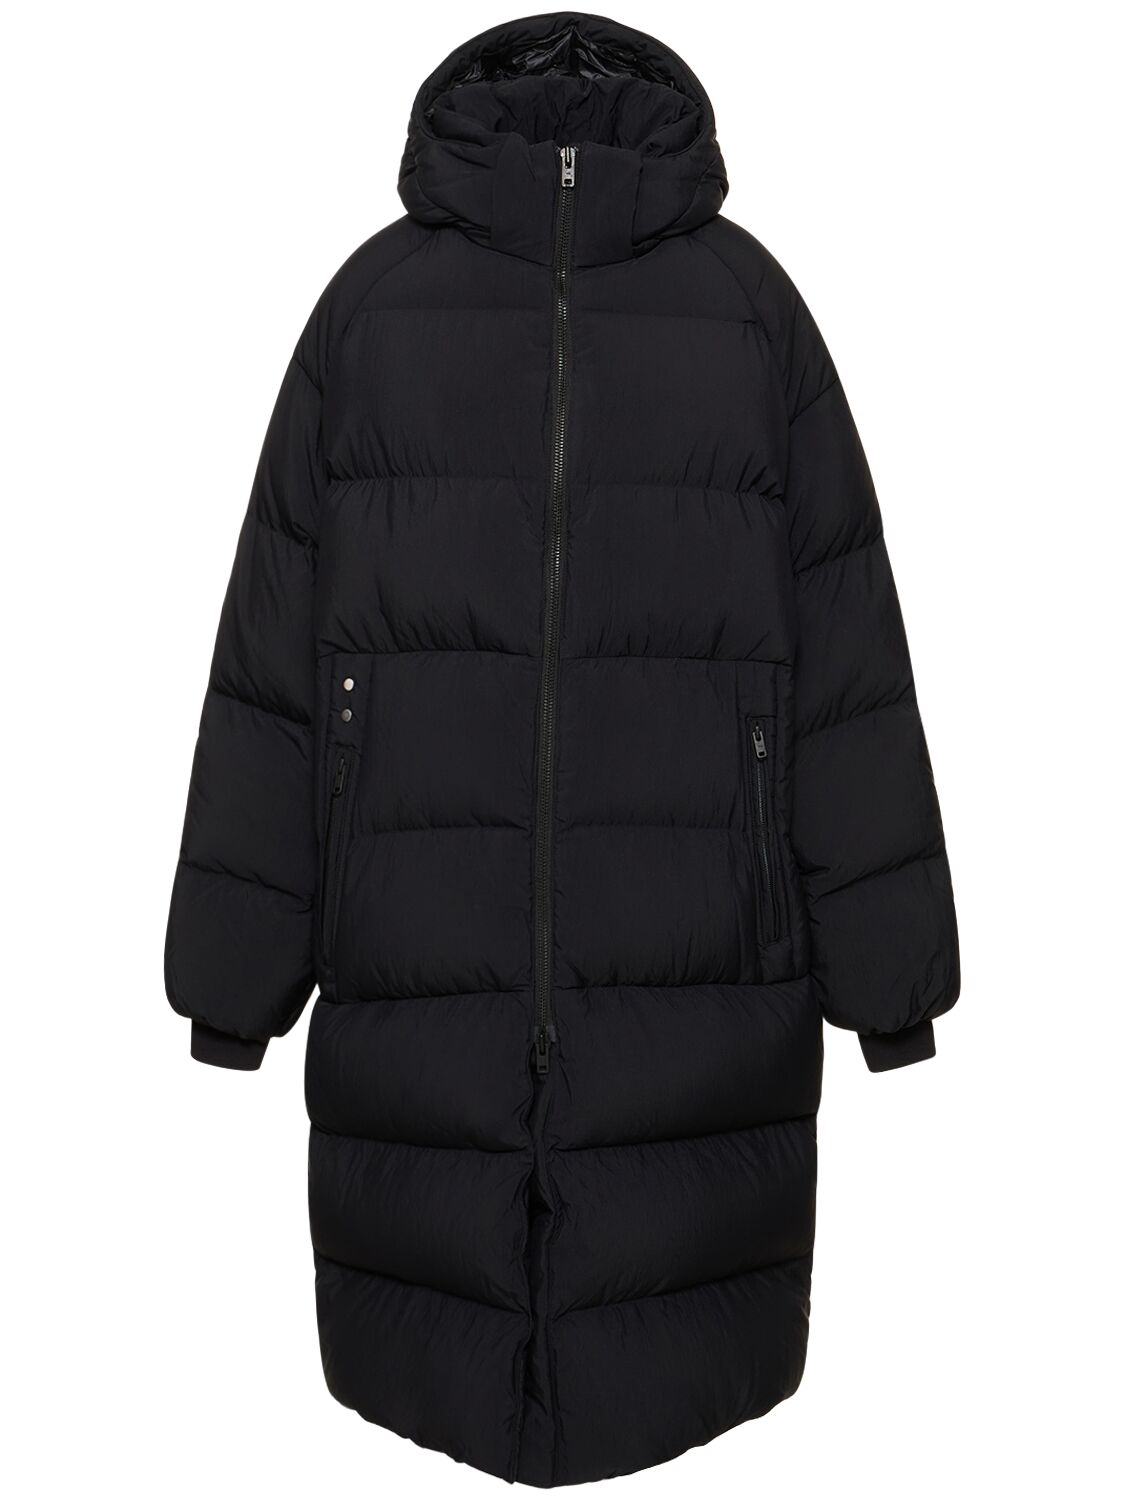 Y-3 Puff Loose Fit Down Parka for Women